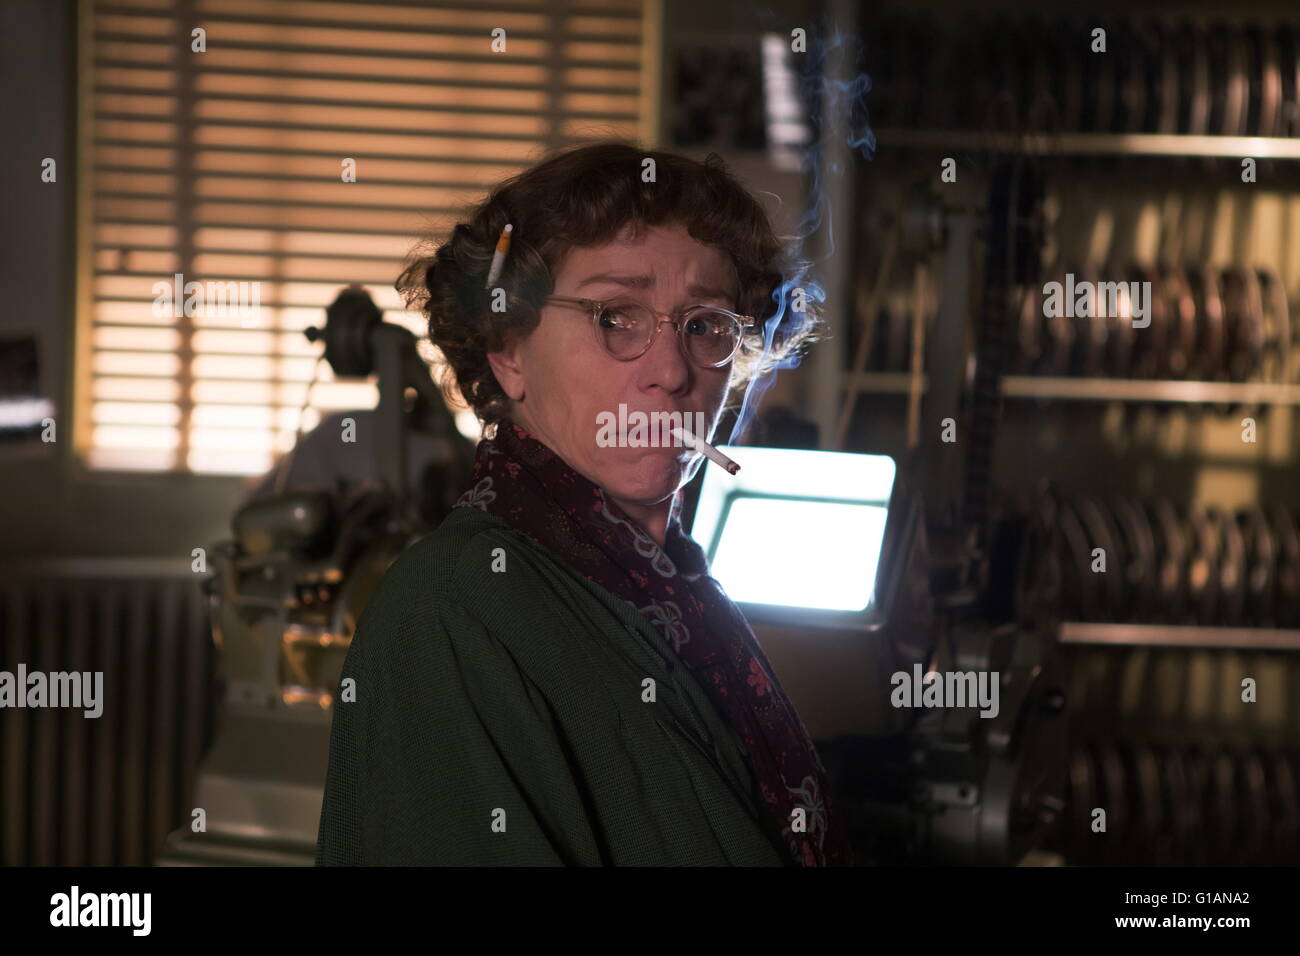 RELEASE DATE: February 5, 2016 TITLE: Hail, Caesar! STUDIO: Universal Pictures DIRECTOR: Ethan Coen, Joel Coen PLOT: A Hollywood fixer in the 1950s works to keep the studio's stars in line PICTURED: Frances McDormand (Credit: c Universal Pictures/Entertainment Pictures/) Stock Photo